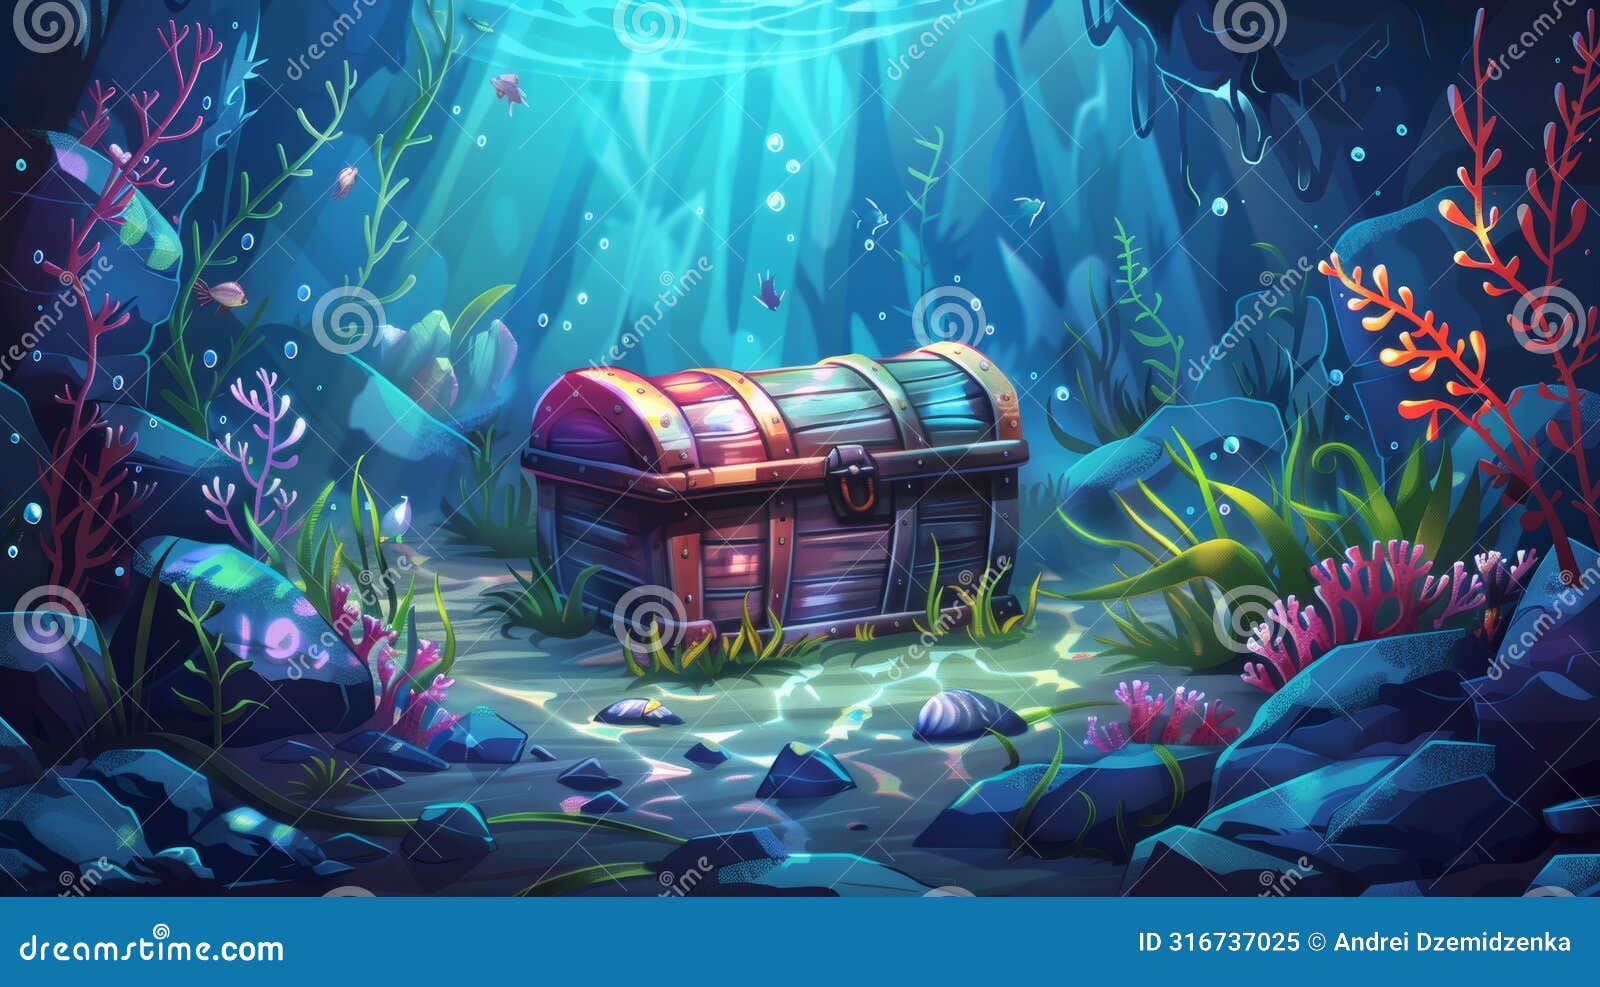 oceanic wildlife painting, showing a bottom seafloor scene with treasure chest. cartoon background of the ocean